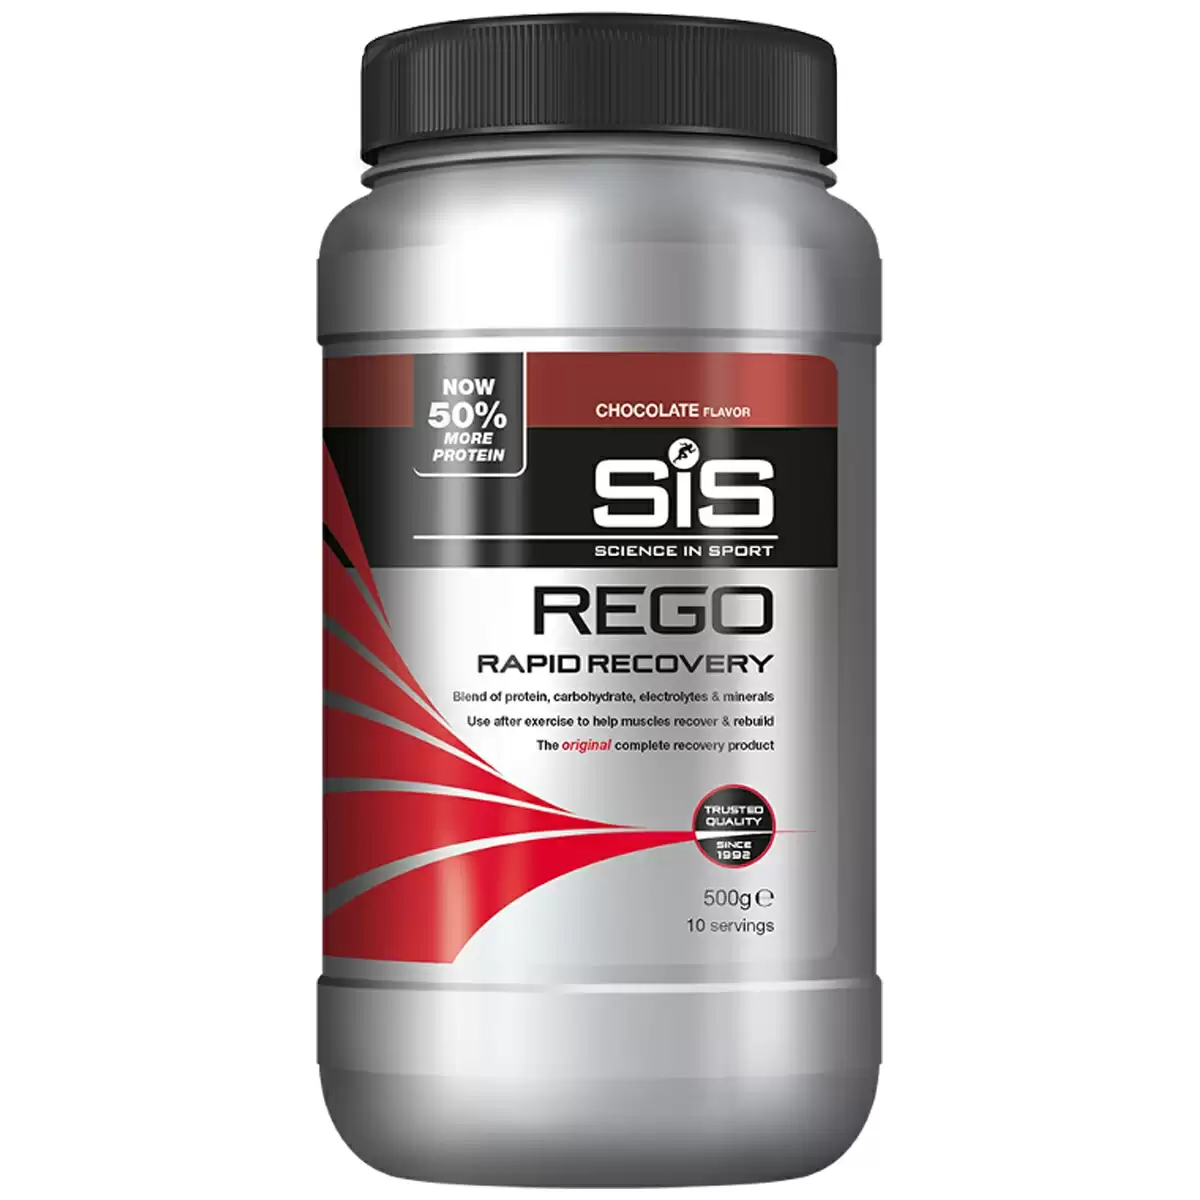 Rego Rapid Recovery Drink Sabor Chocolate 500g - image